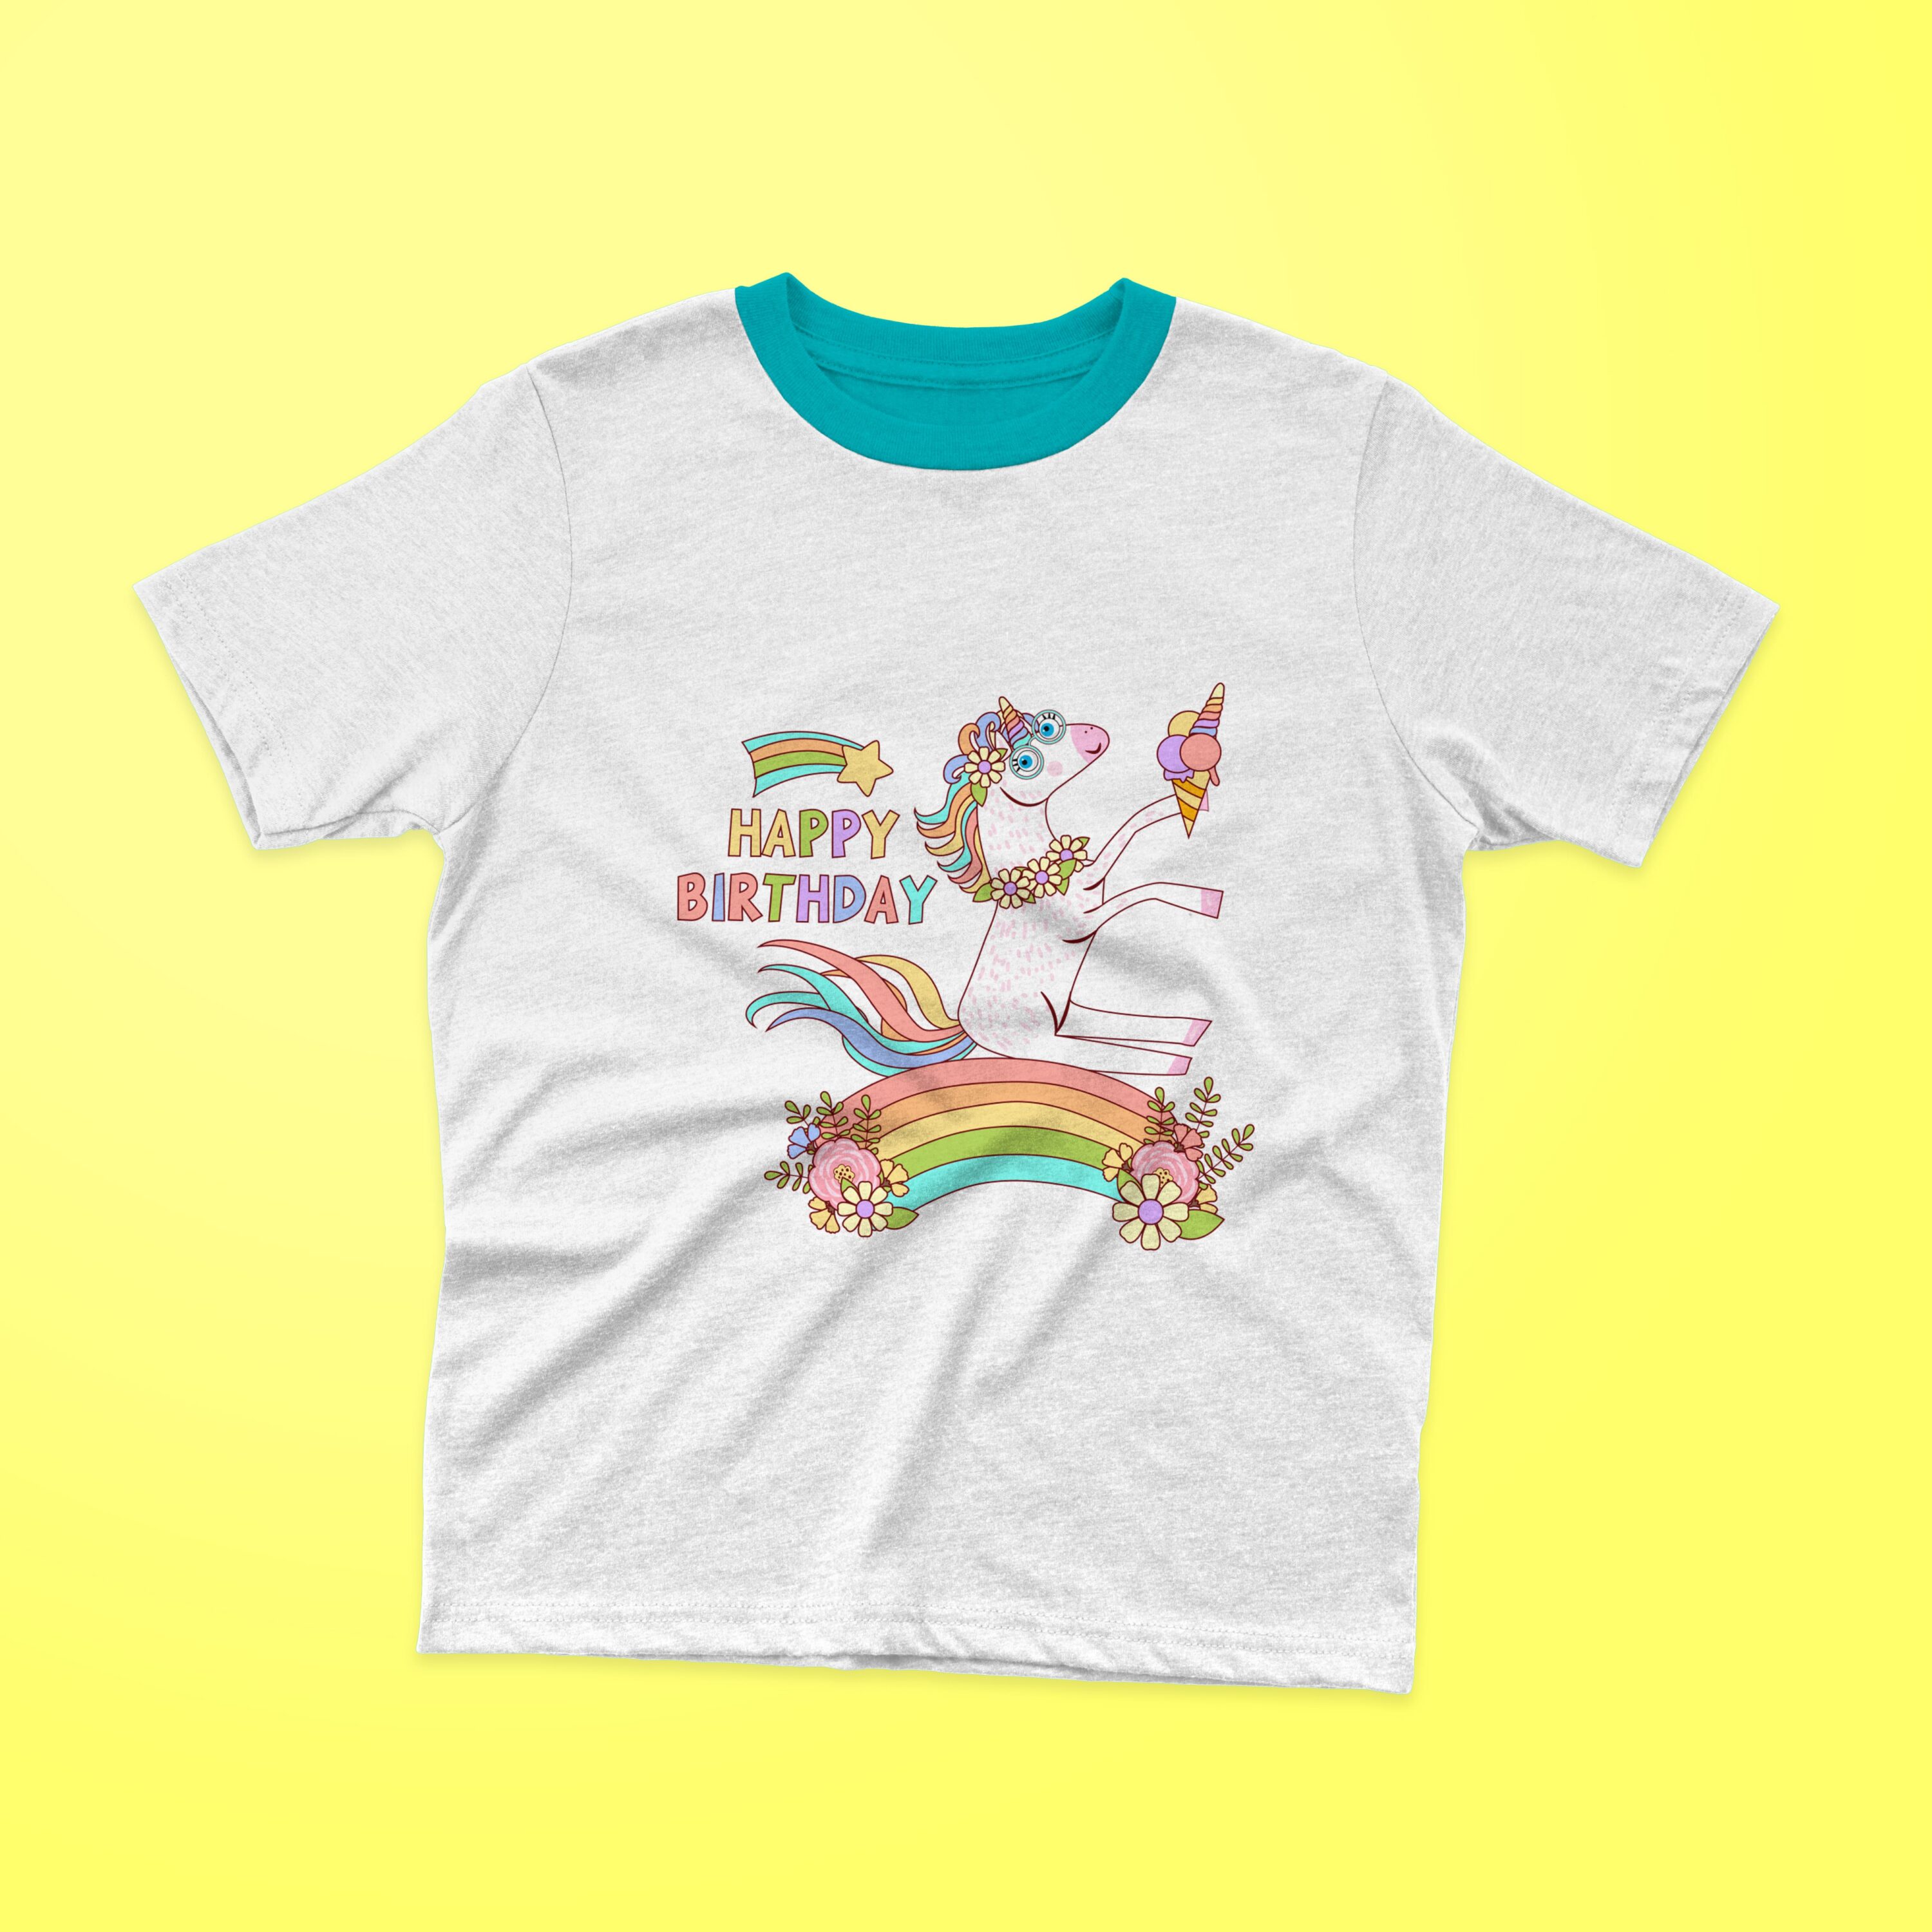 White t-shirt with a turquoise collar and a cute unicorn with colorful lettering "HAPPY BIRTHDAY" and a rainbow on a yellow background.